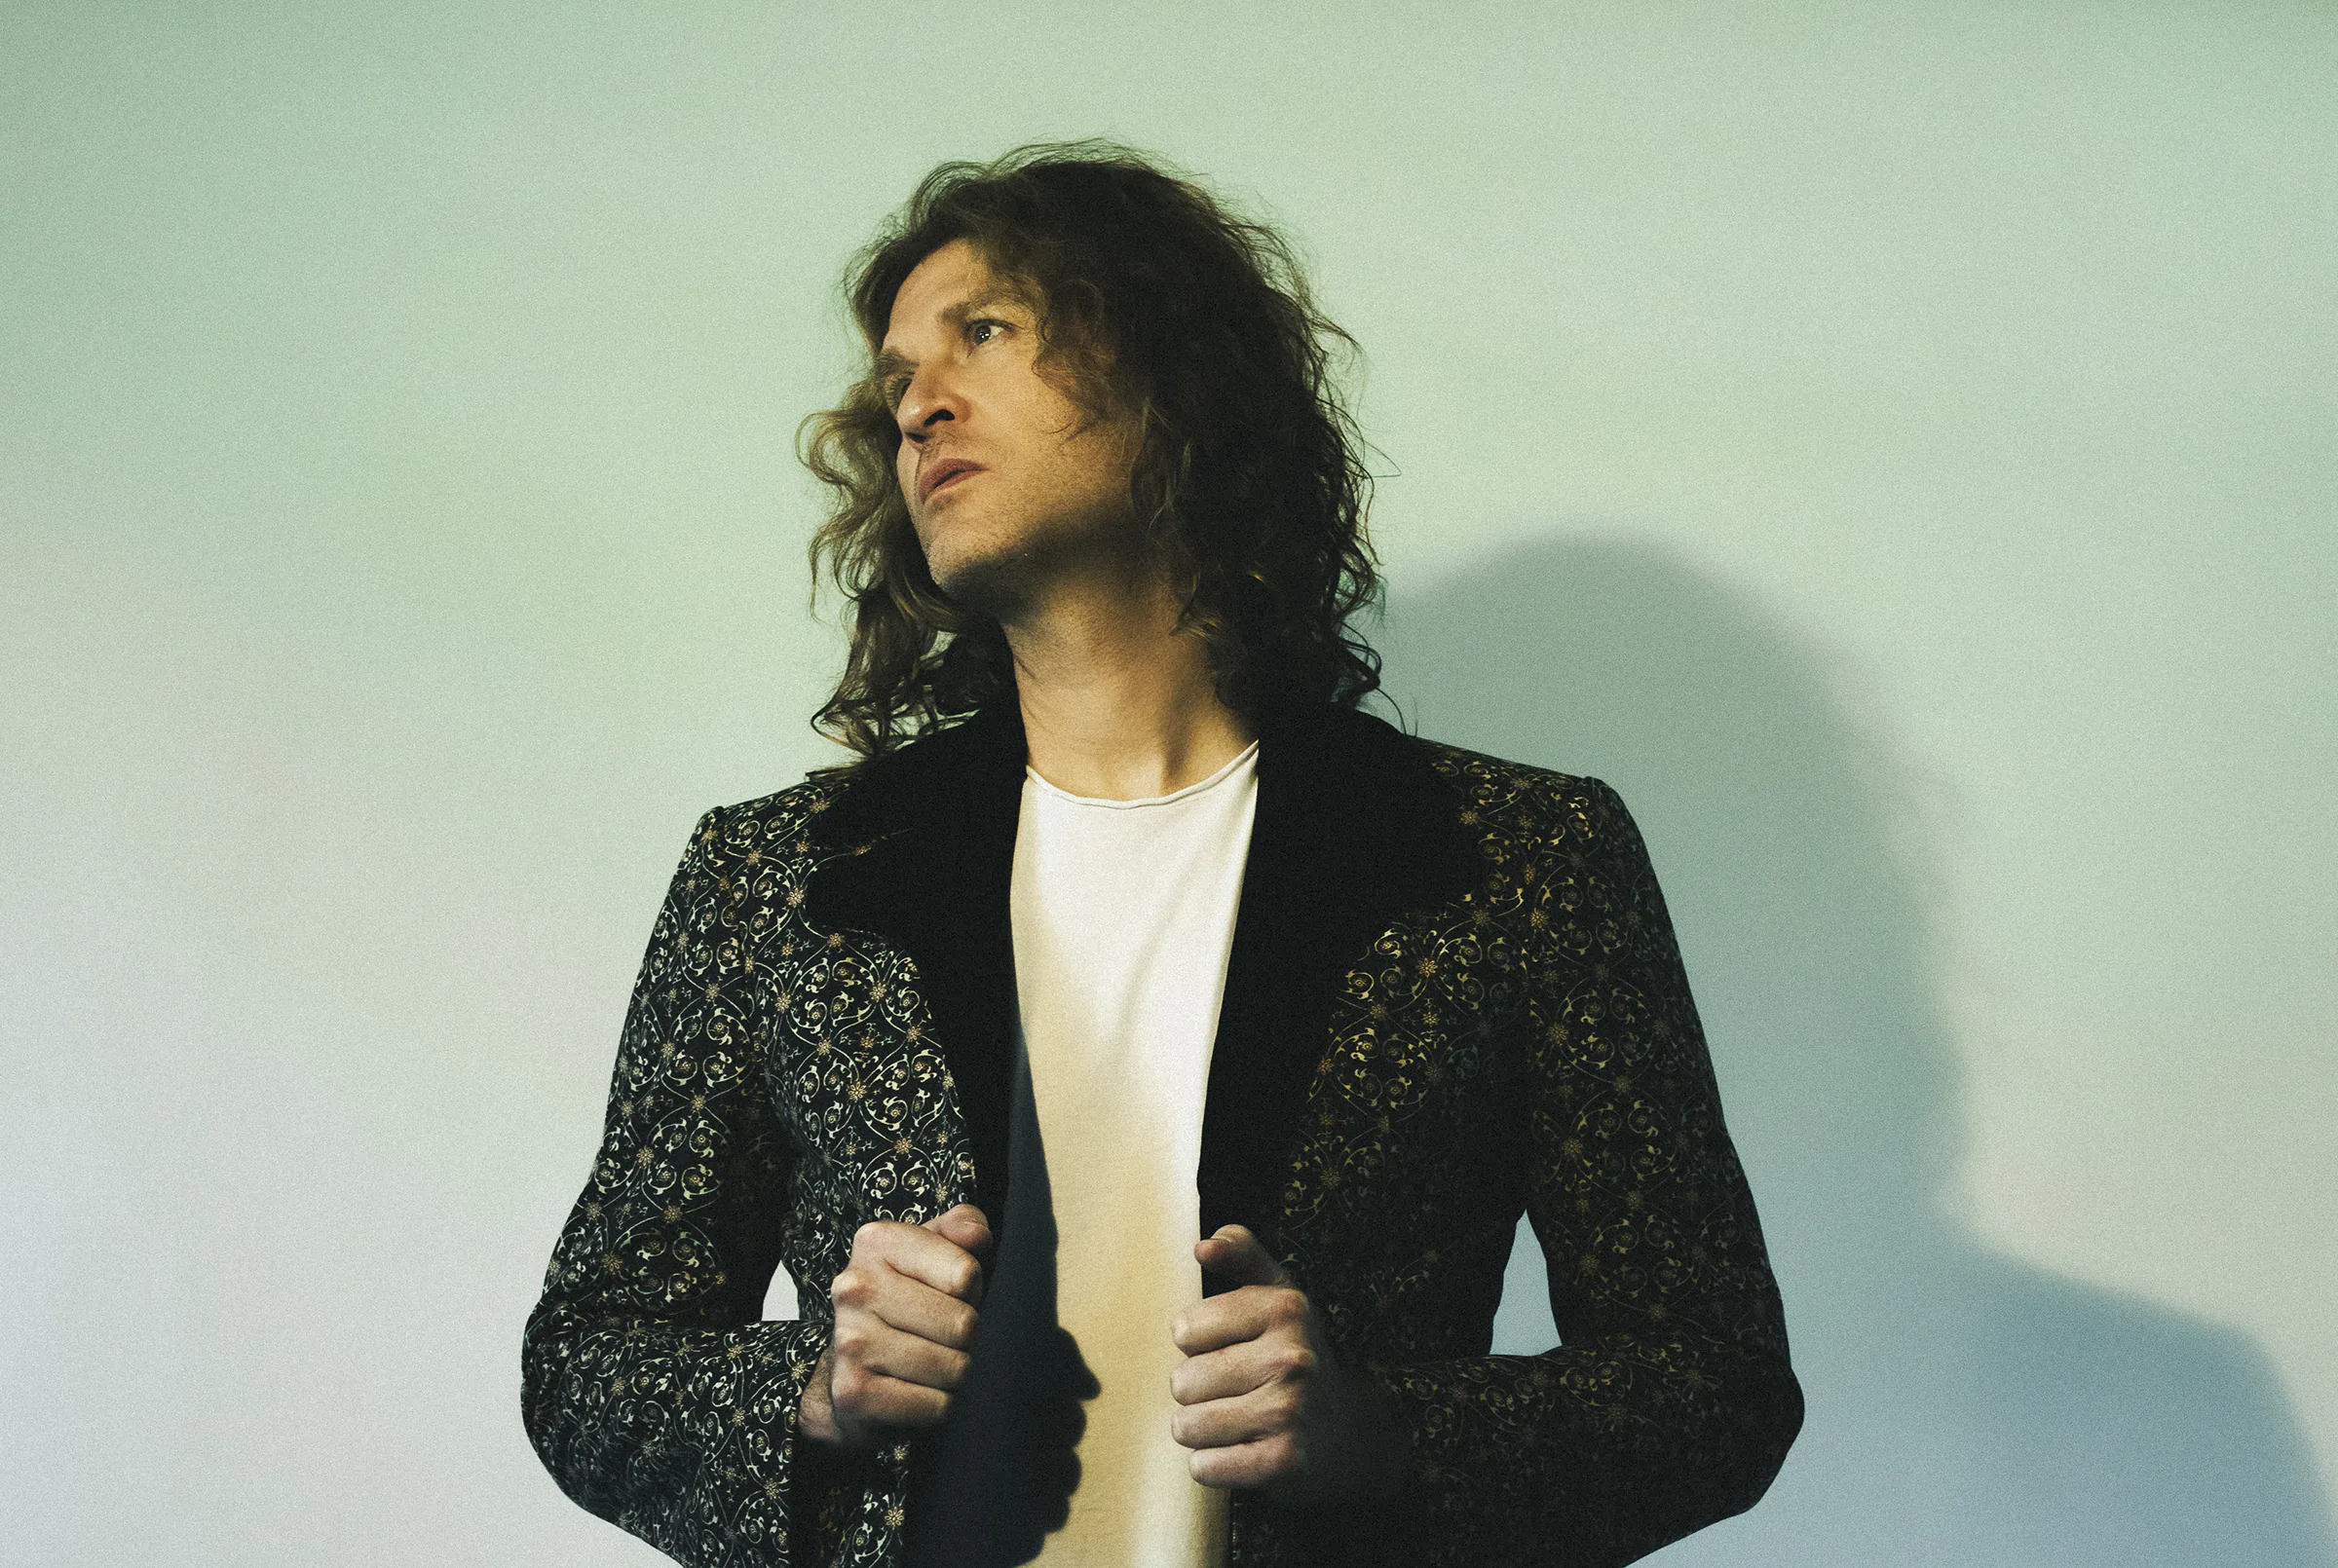 The Killers’ DAVE KEUNING shares video for ‘Time and Fury’ from his forthcoming solo album, out 25th June